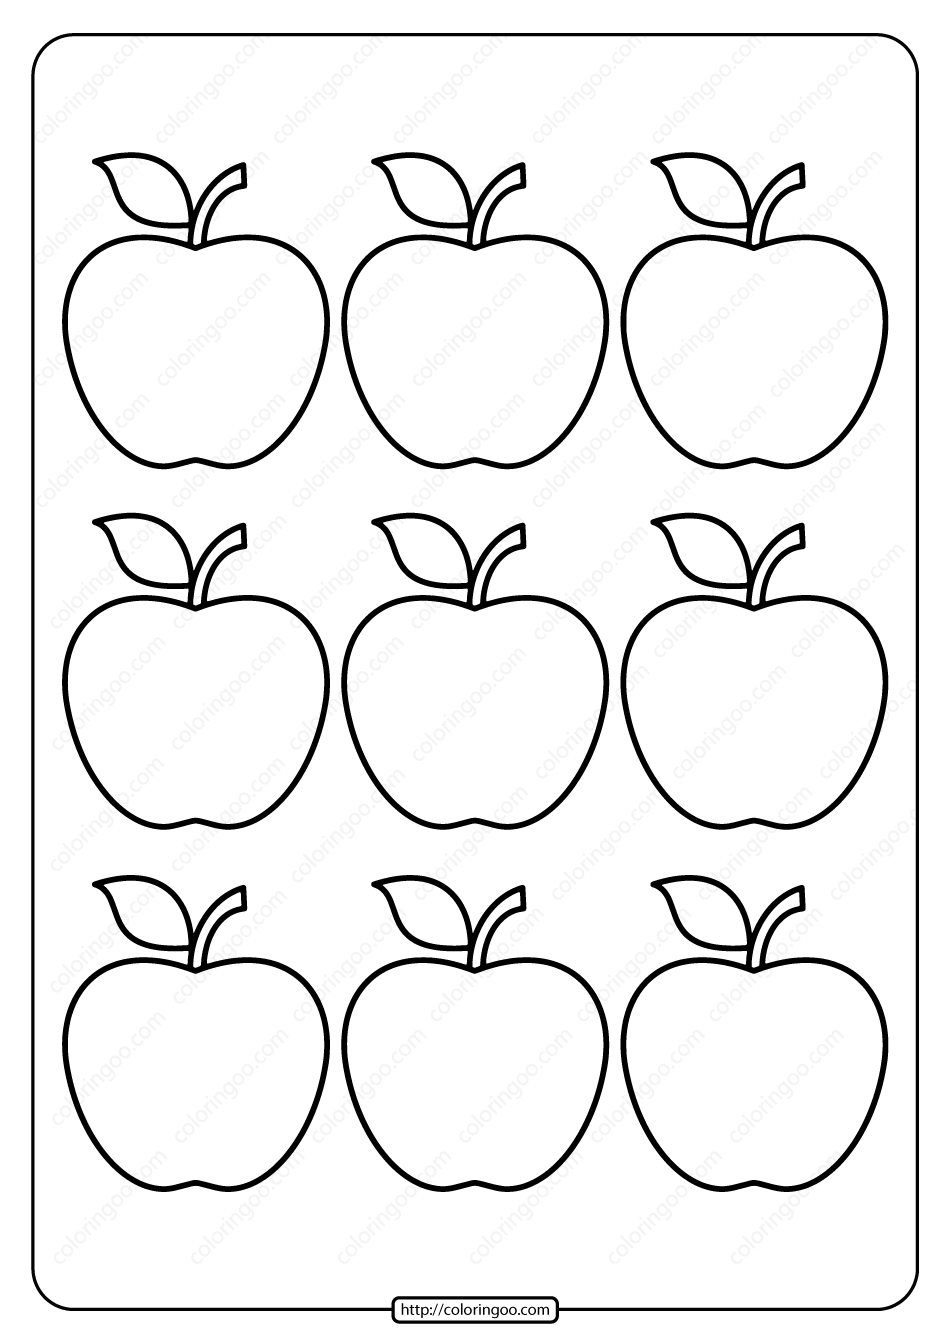 Printable simple apple outline coloring page